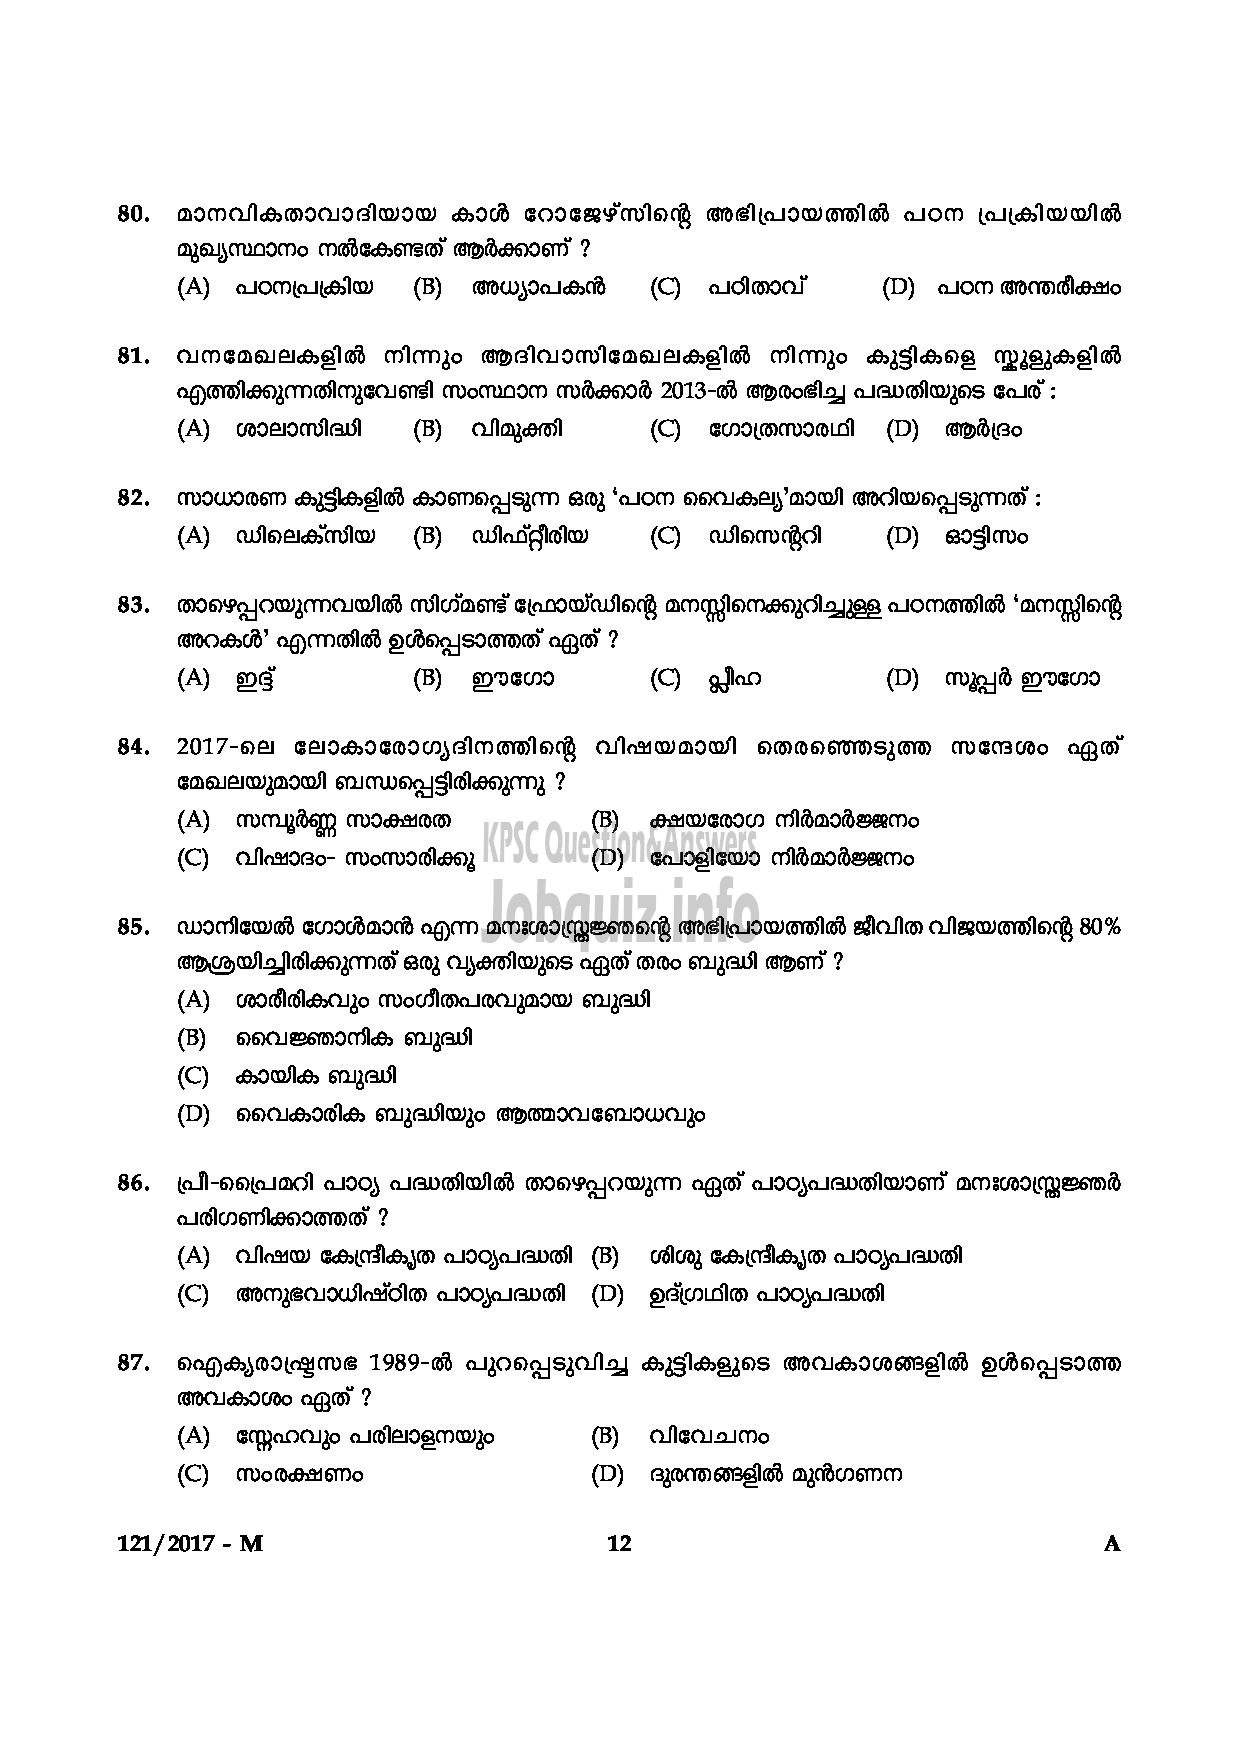 Kerala PSC Question Paper - PRE PRIMARY TEACHER EDUCATION MALAYALAM QUESTION -12